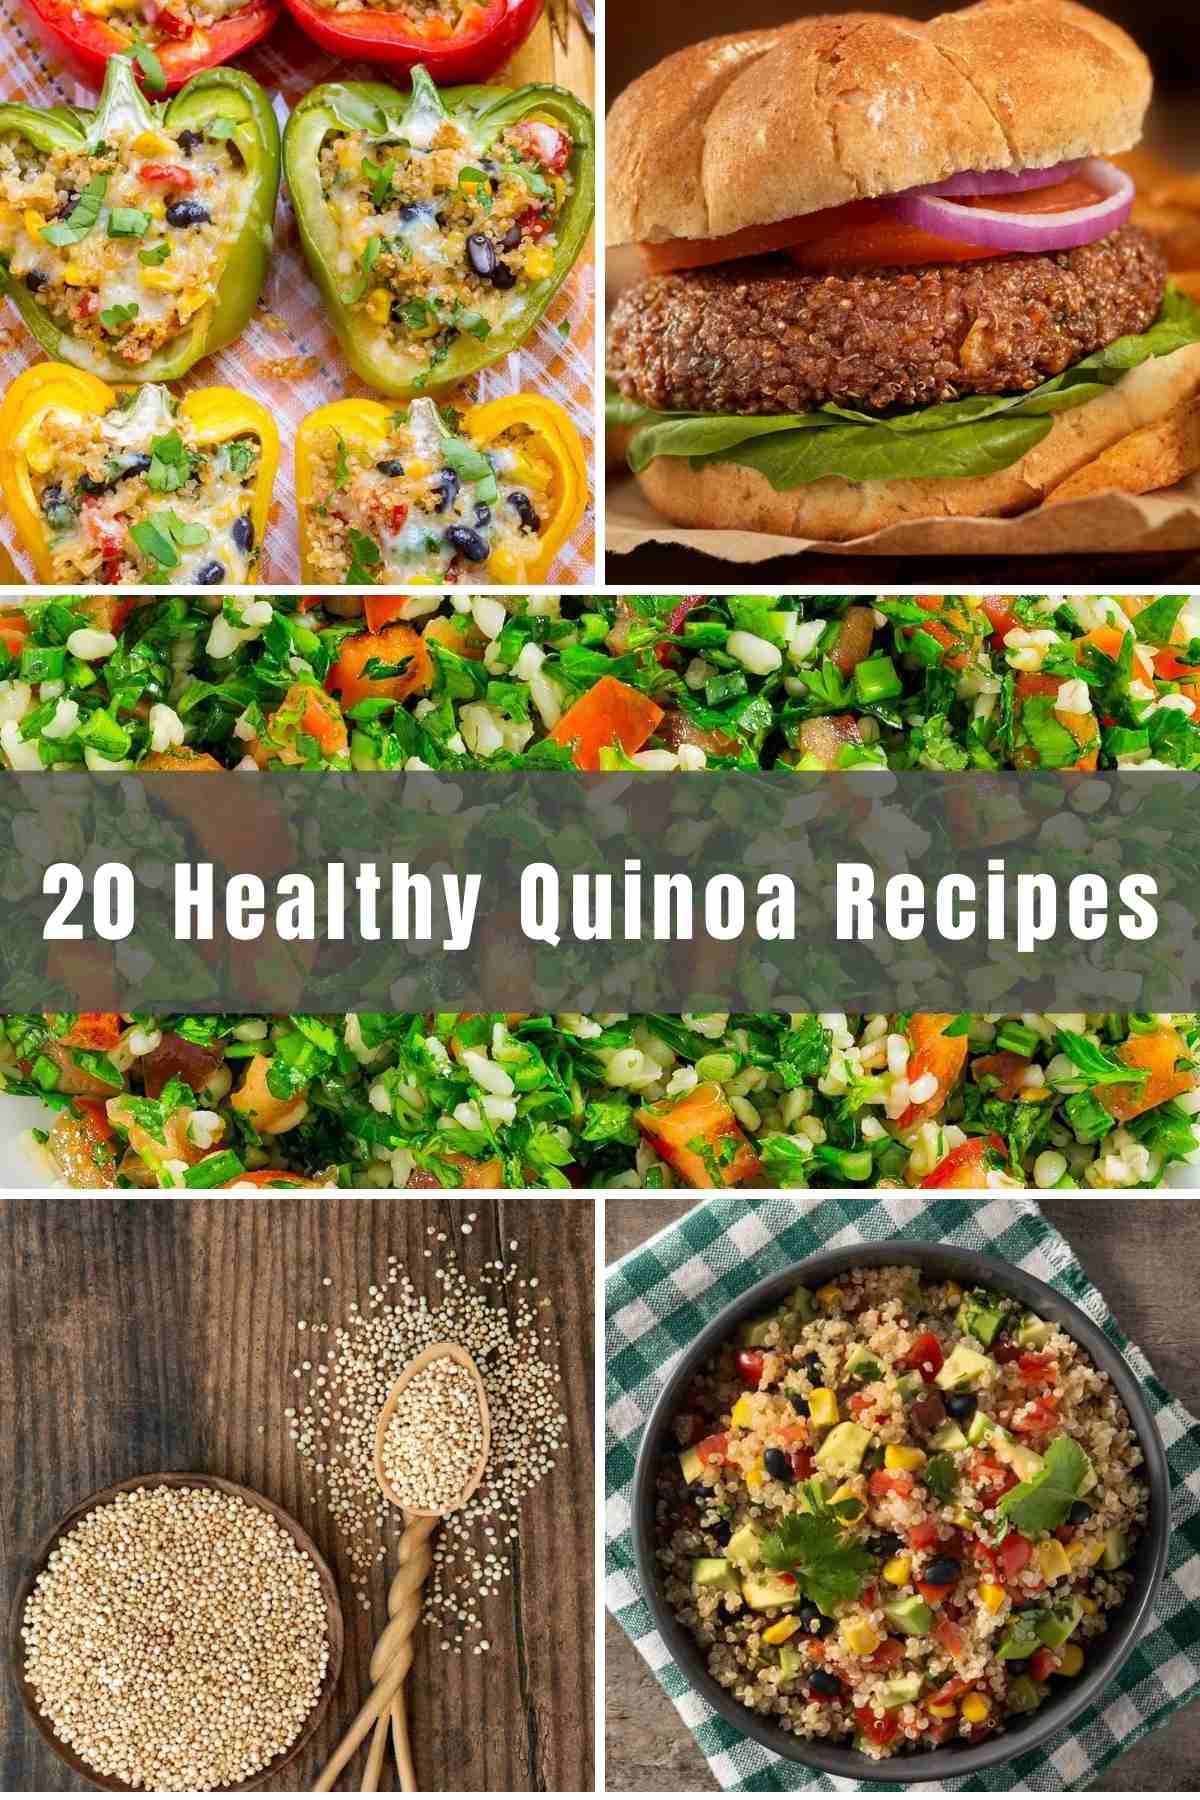 Here are all the best Healthy Quinoa Recipes to try. Low in calories and high in fiber and nutrition, quinoa is a plant protein with many health benefits!